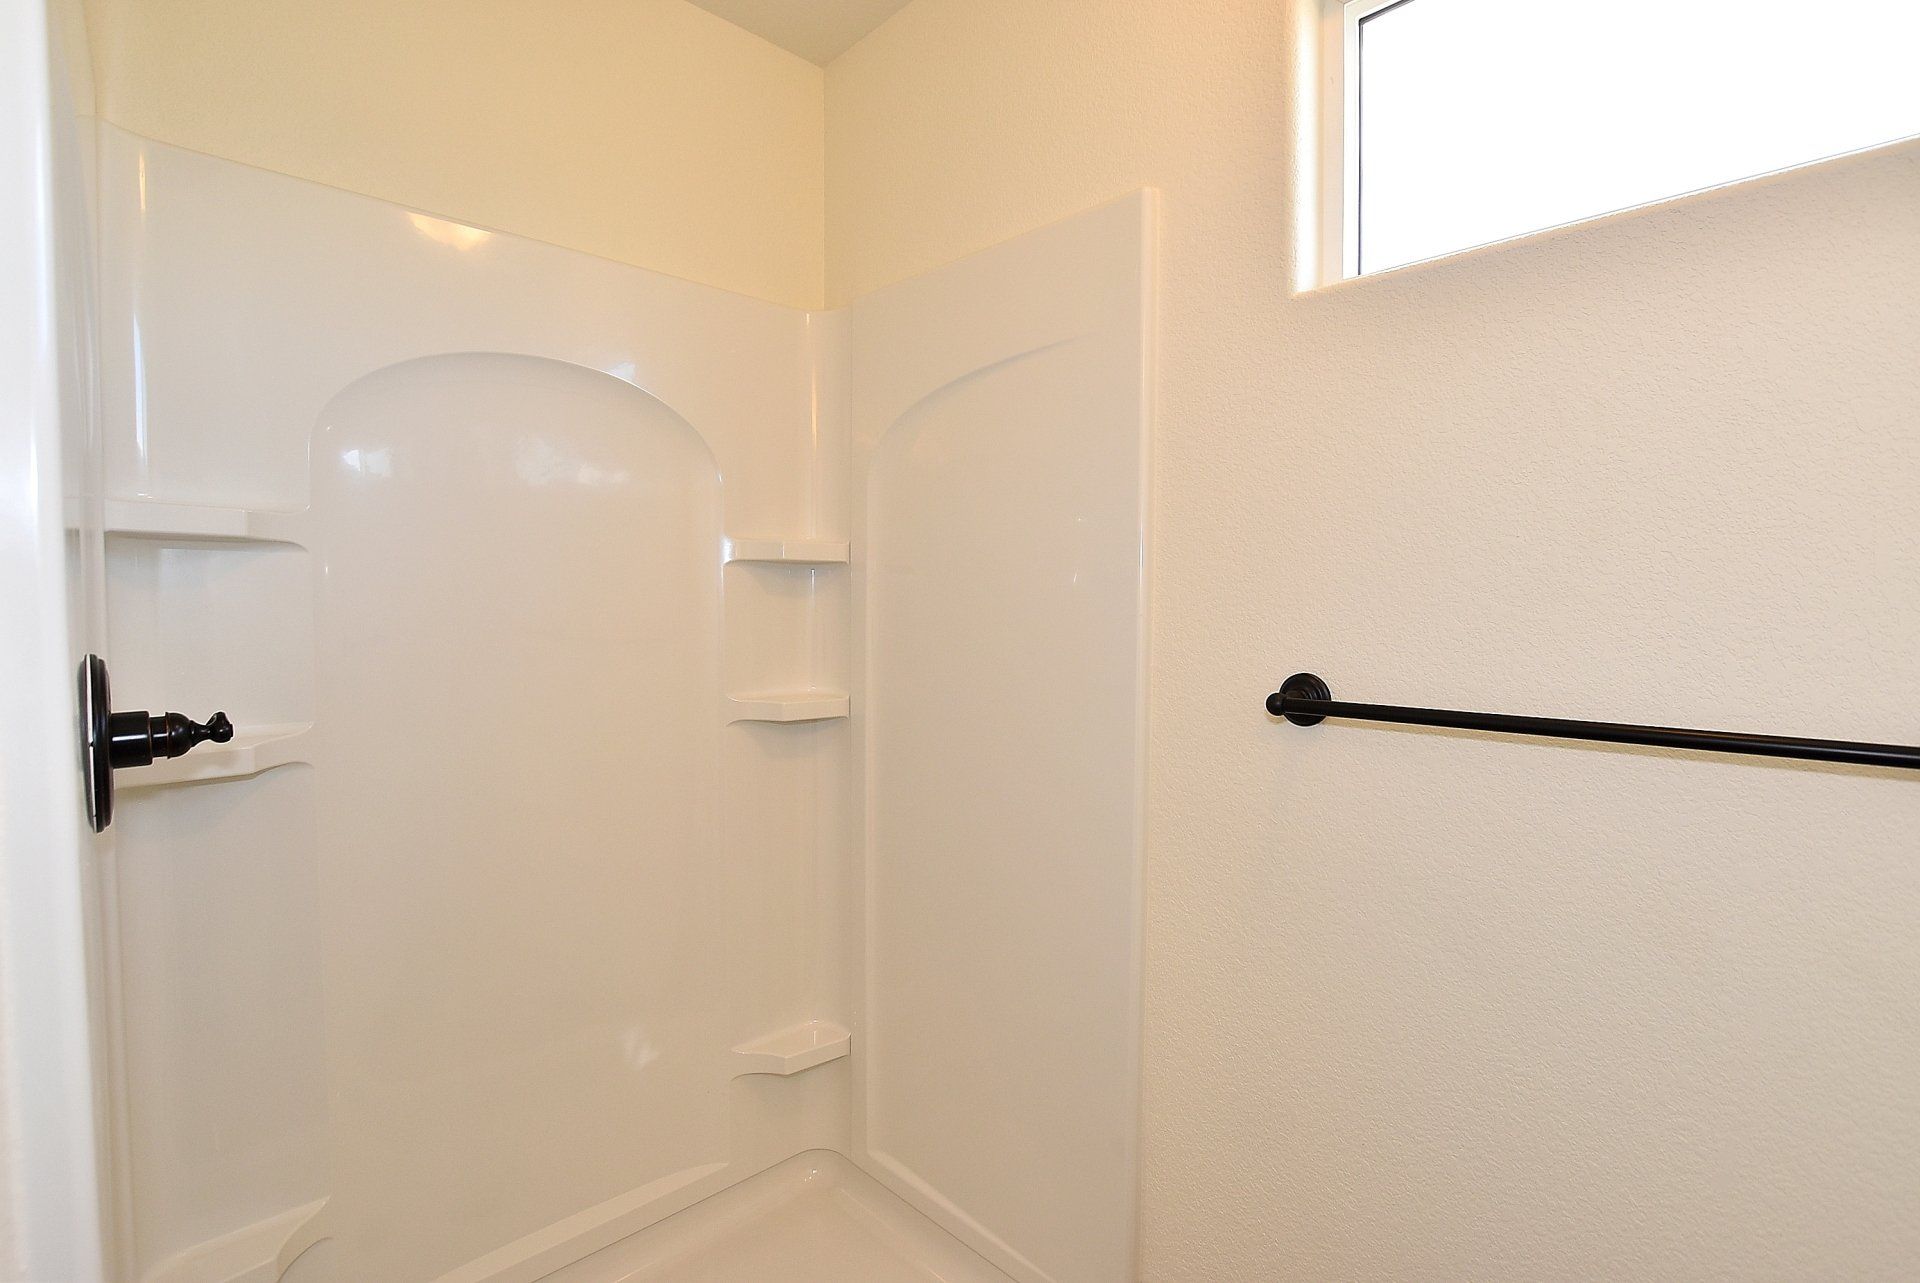 Shower with railing